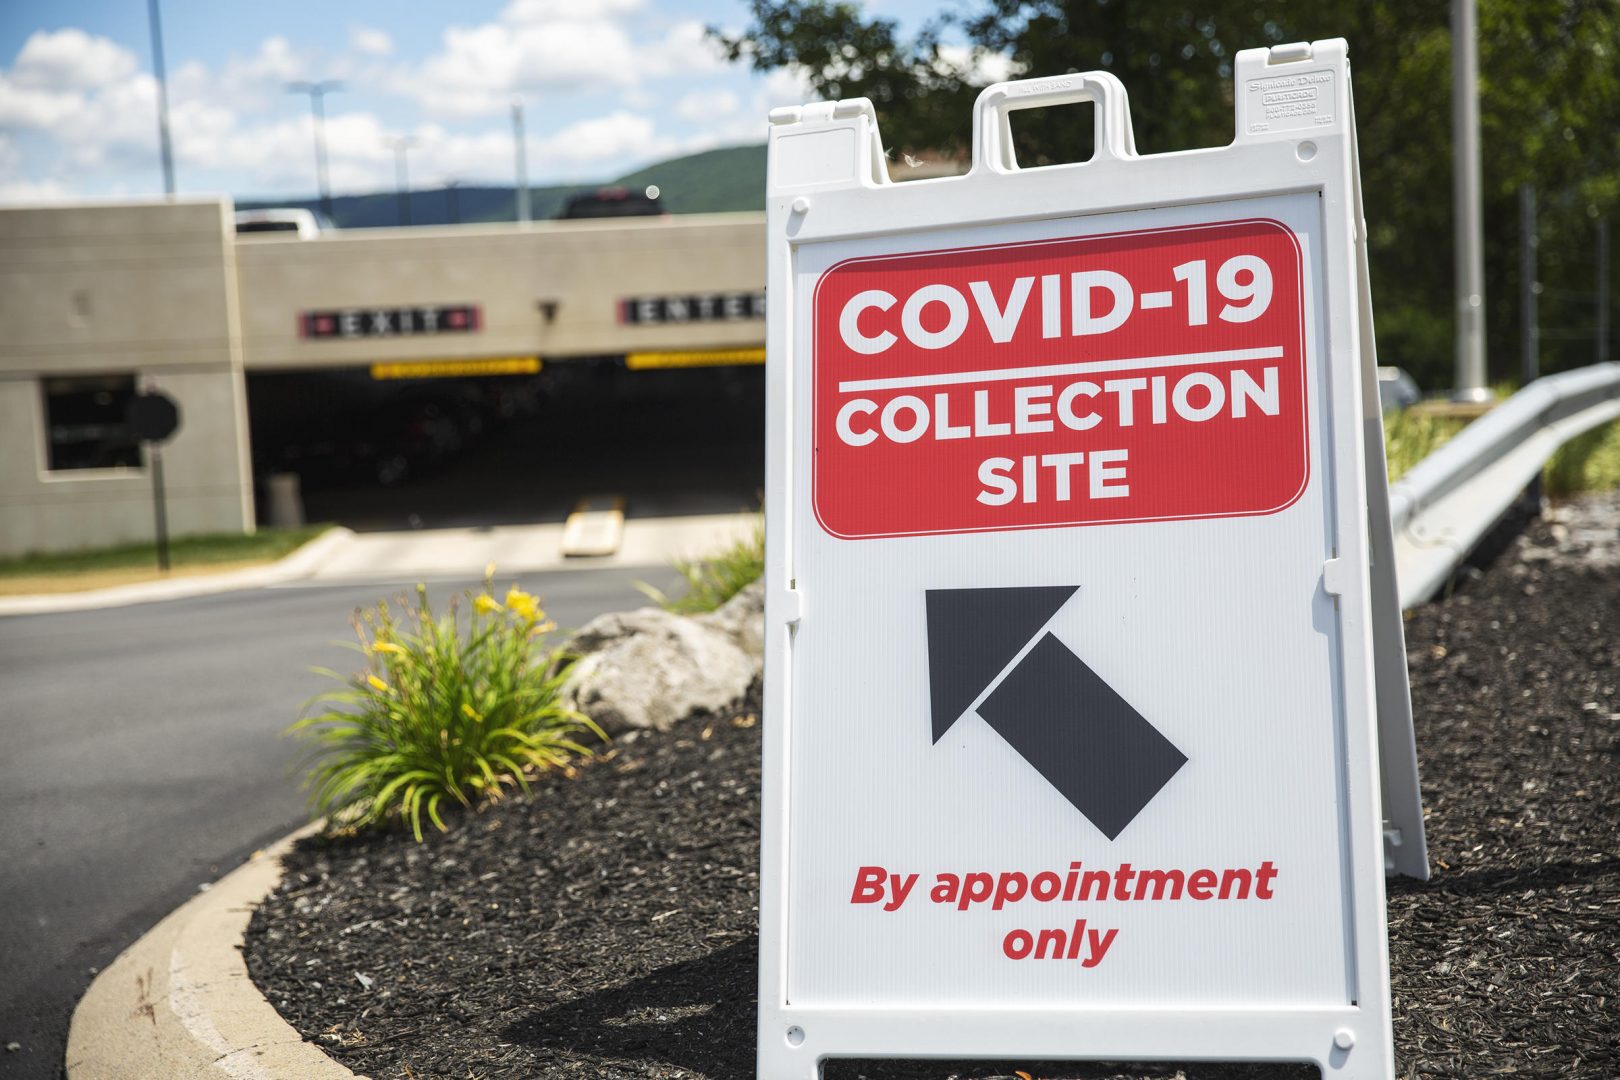 A COVID-19 collection site at Mount Nittany Medical Center in State College, Pa.